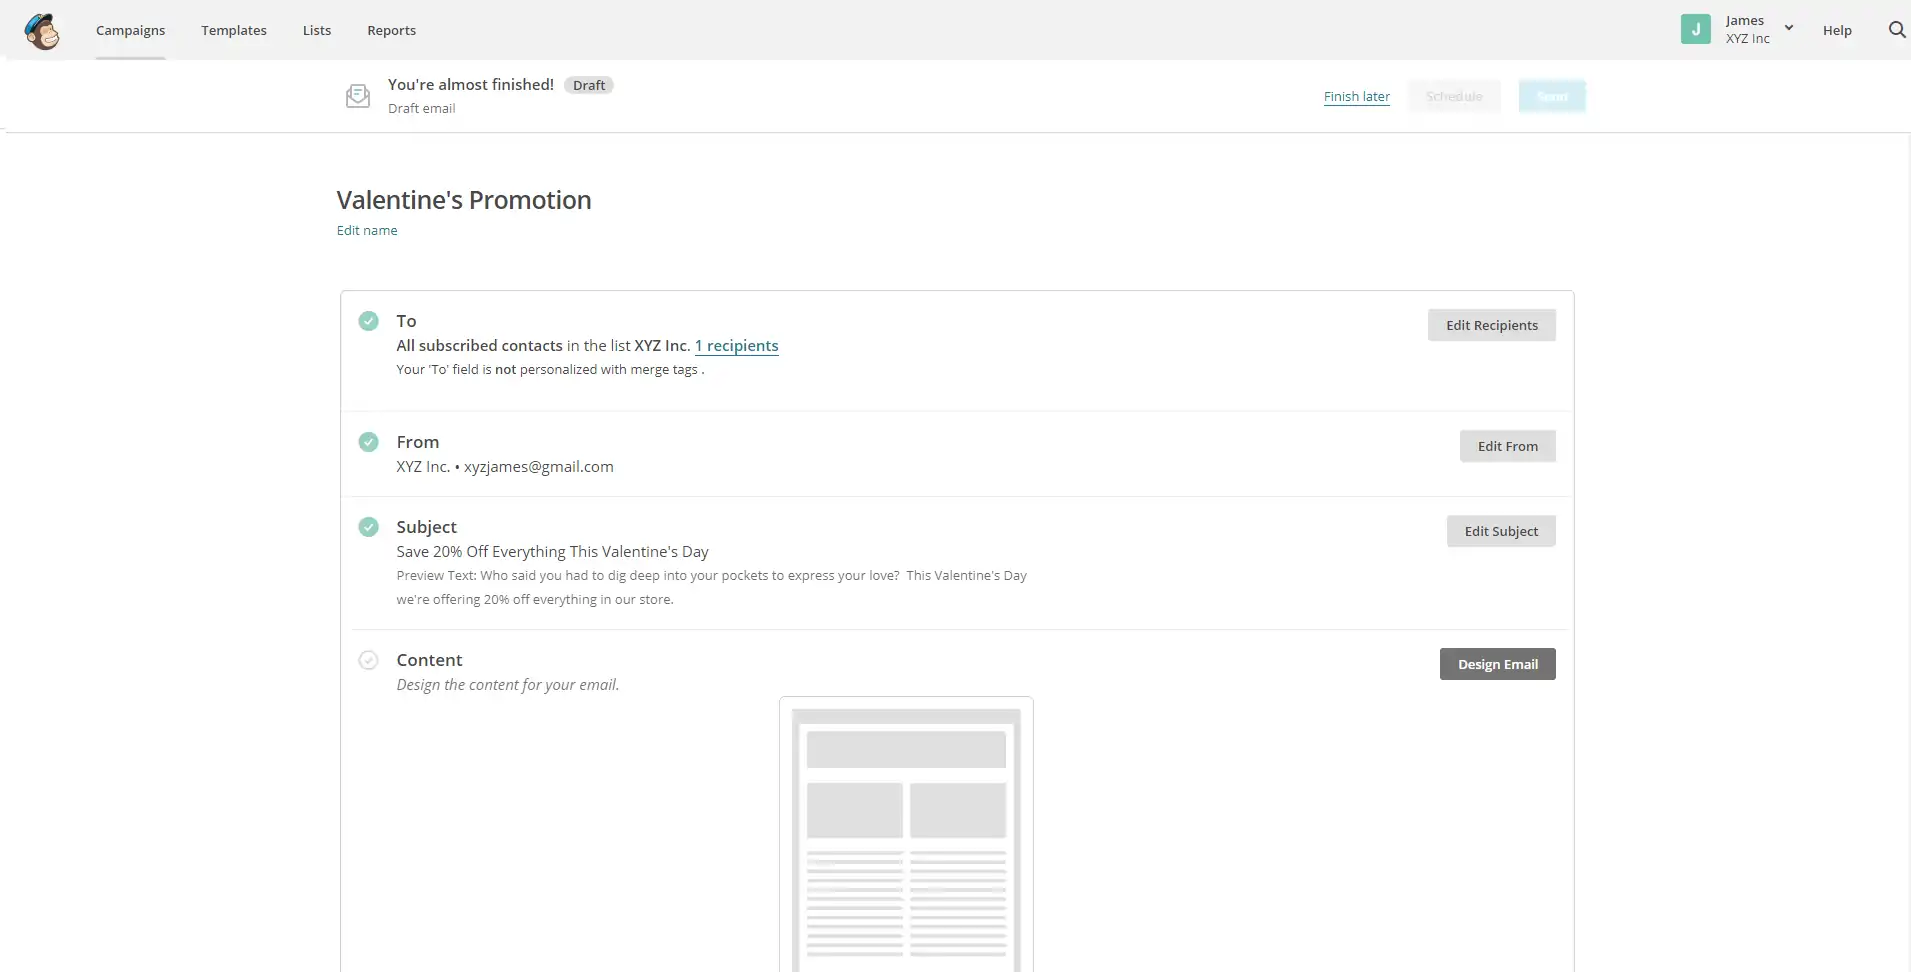 Getting Started With Mailchimp - Understanding and Using Mailchimp Email Marketing Automation 11